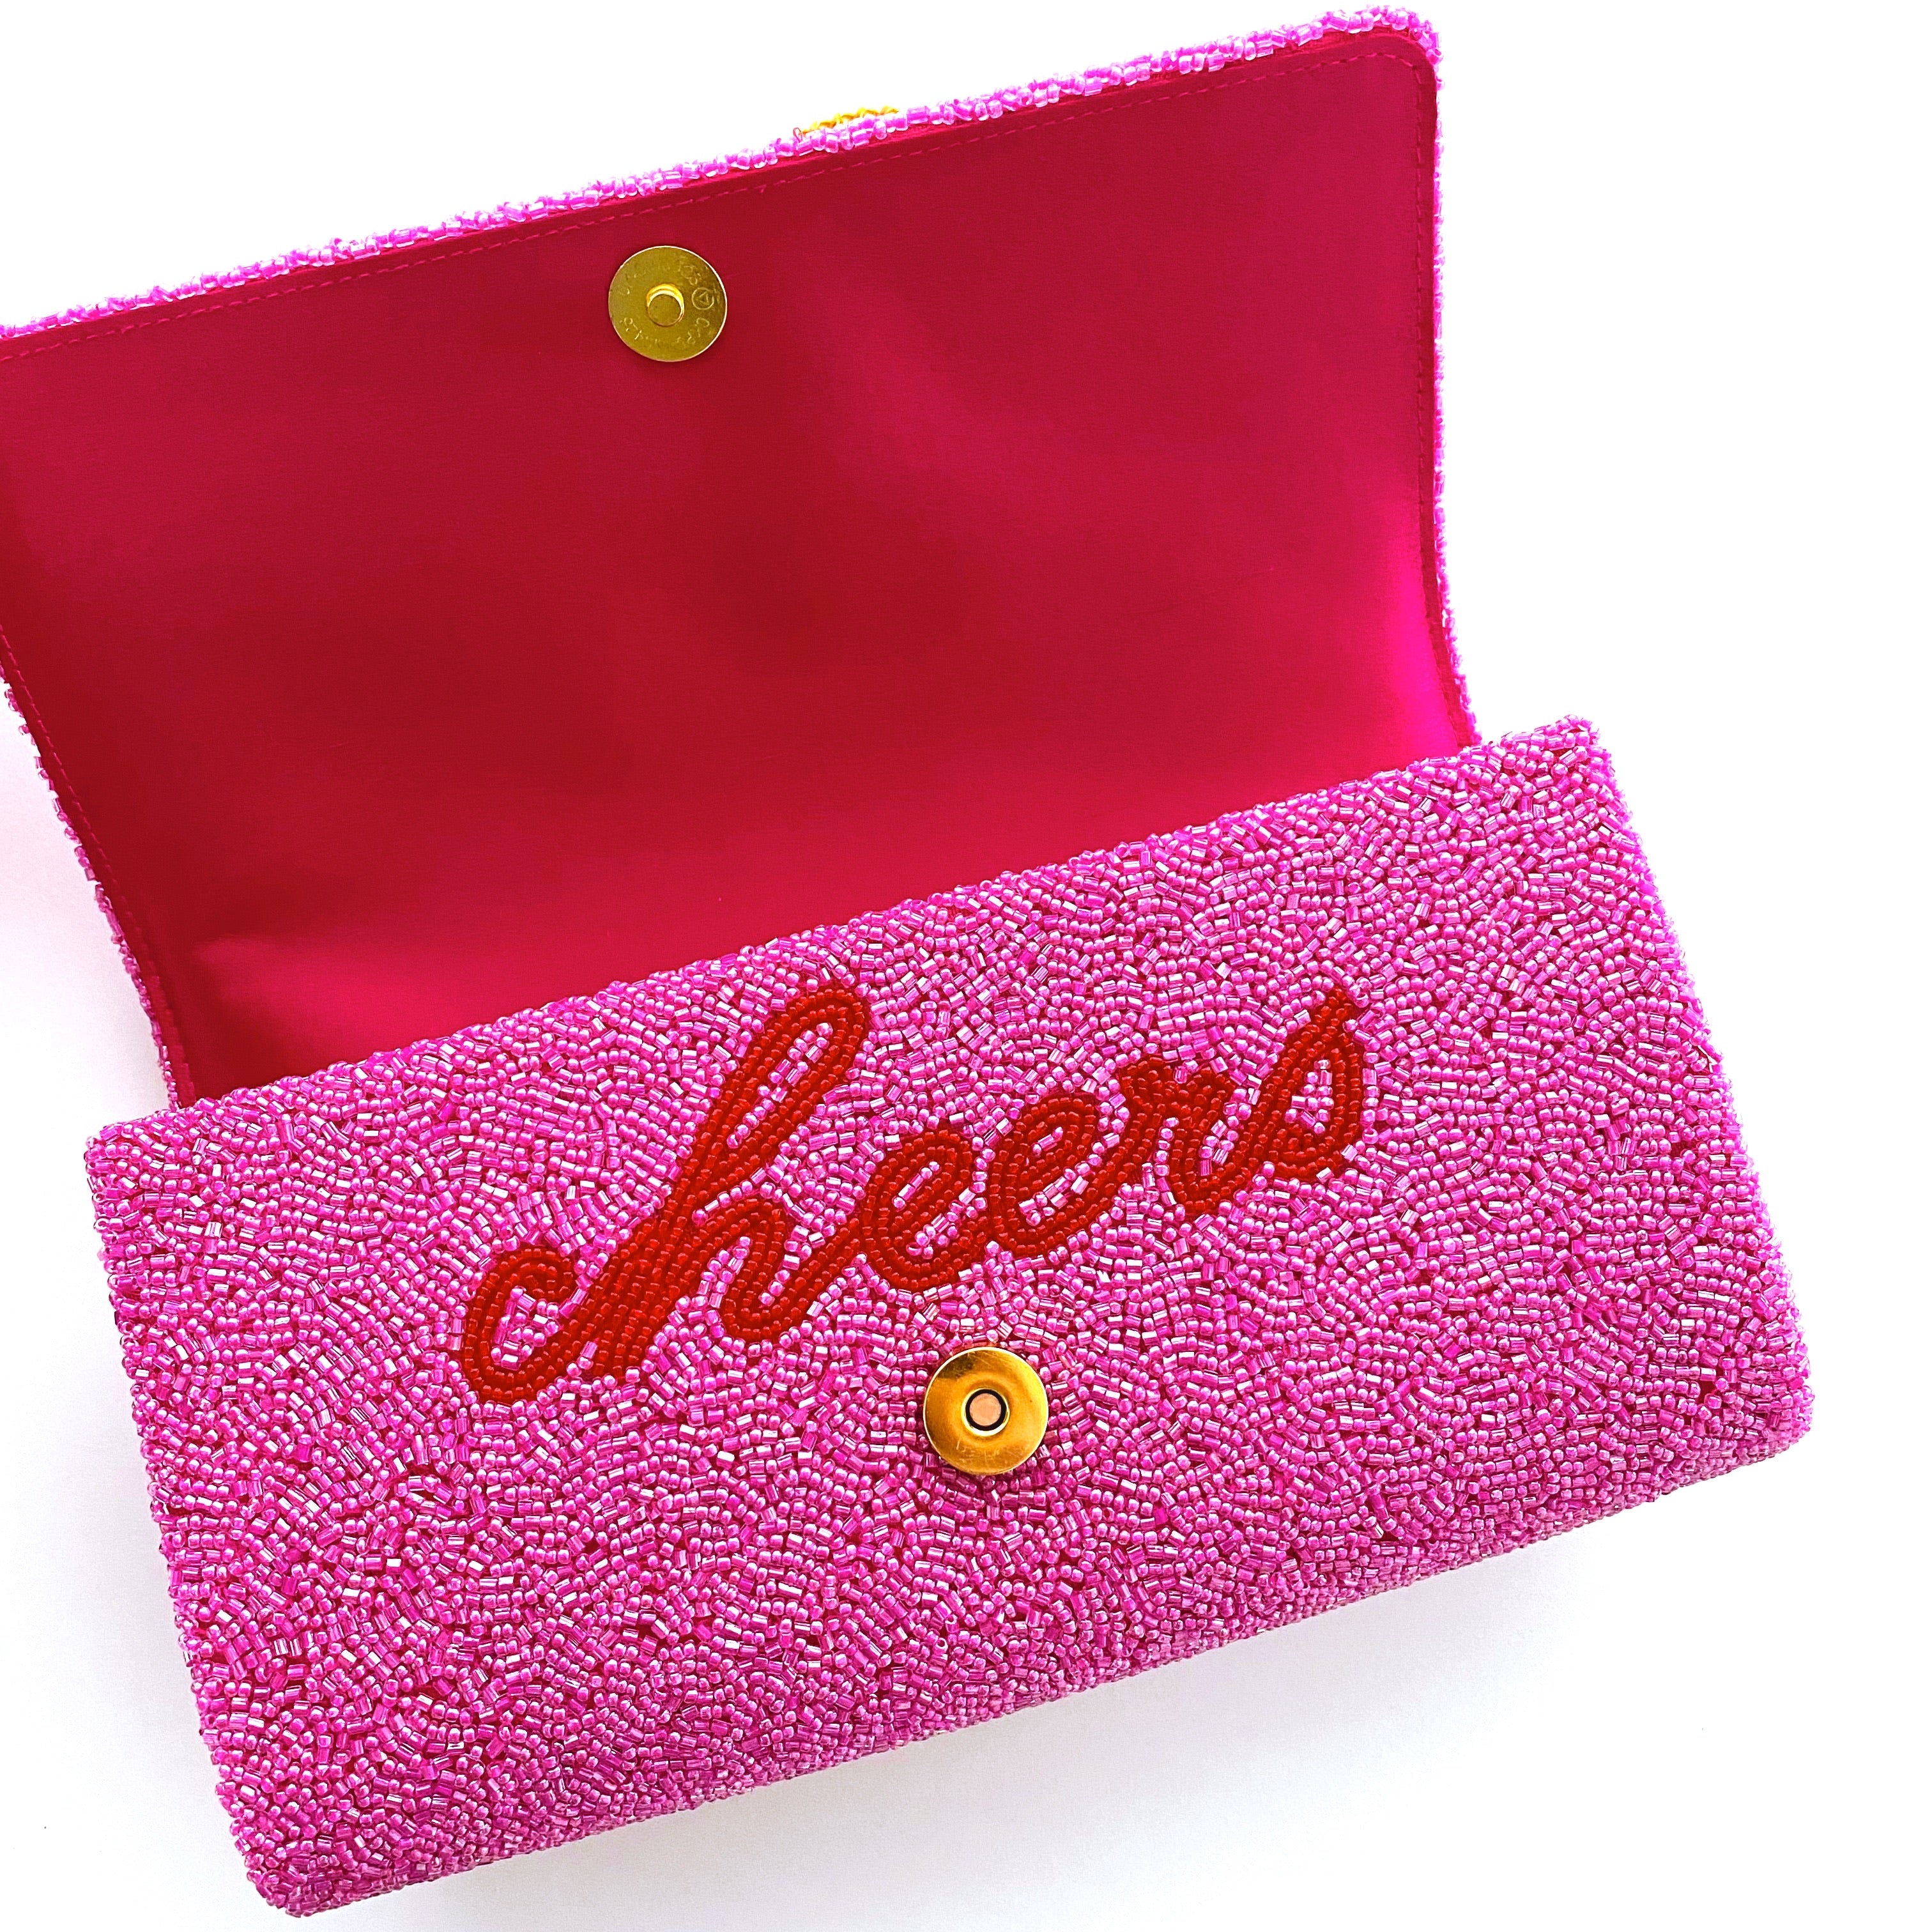 Custom Champagne Clutch - MANY COLORS AVAILABLE